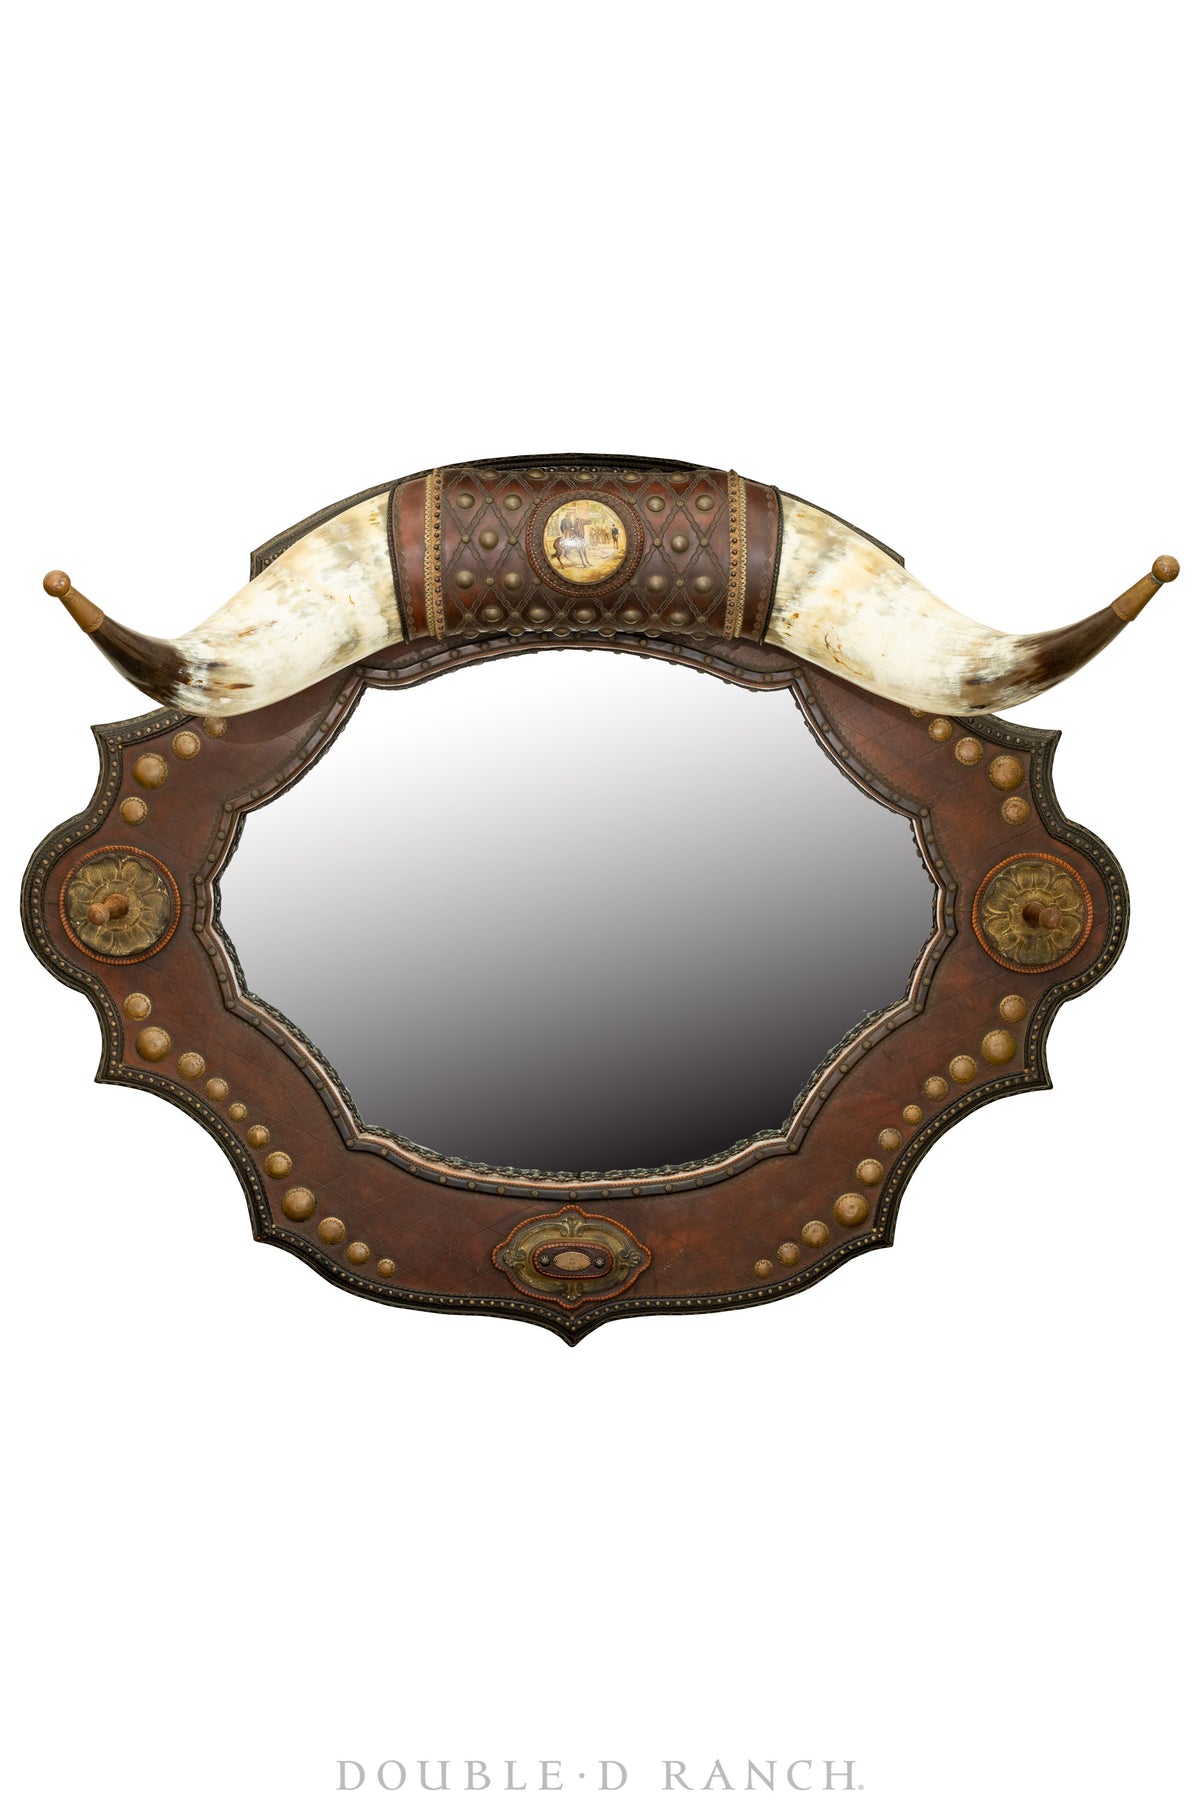 Art, Taxidermy, Saloon Mirror with Longhorns, Leather Tooling and Bras